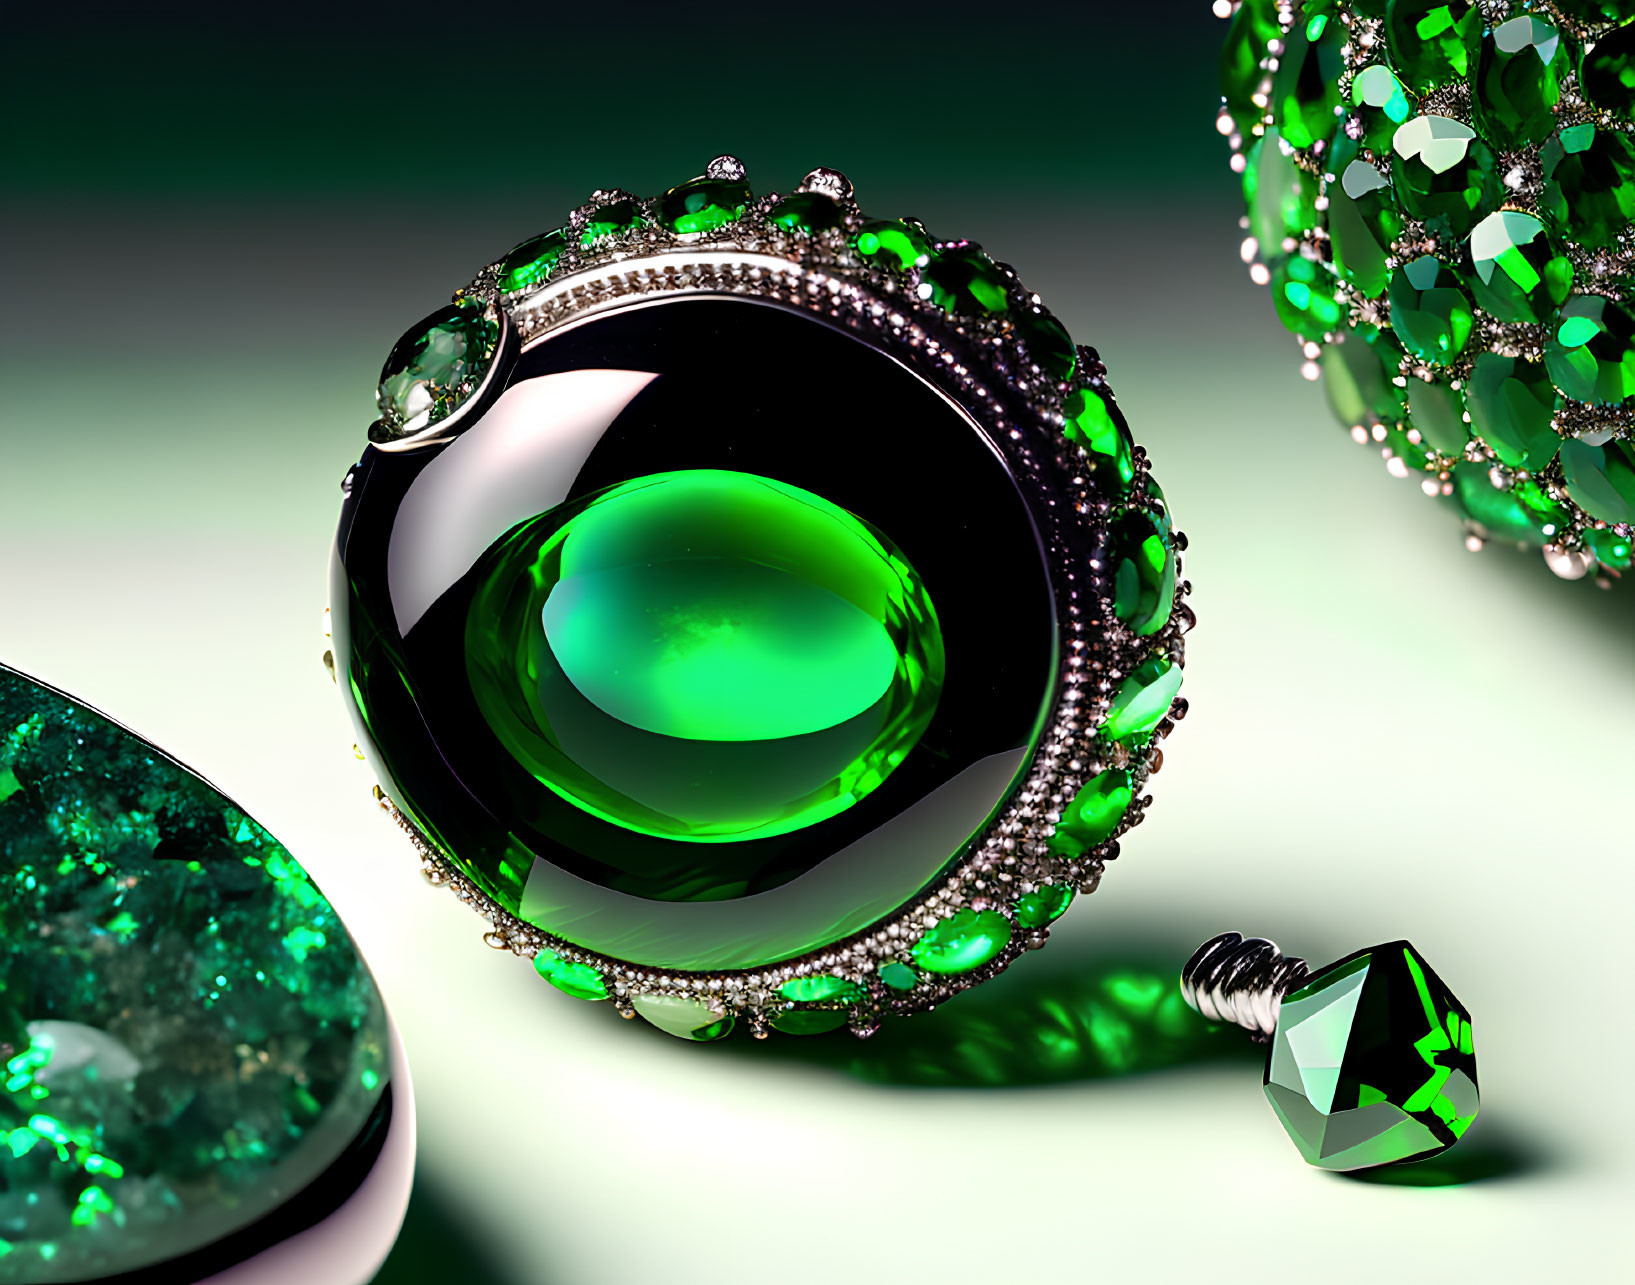 Emerald Jewelry with Green Gems on Black and Silver Designs